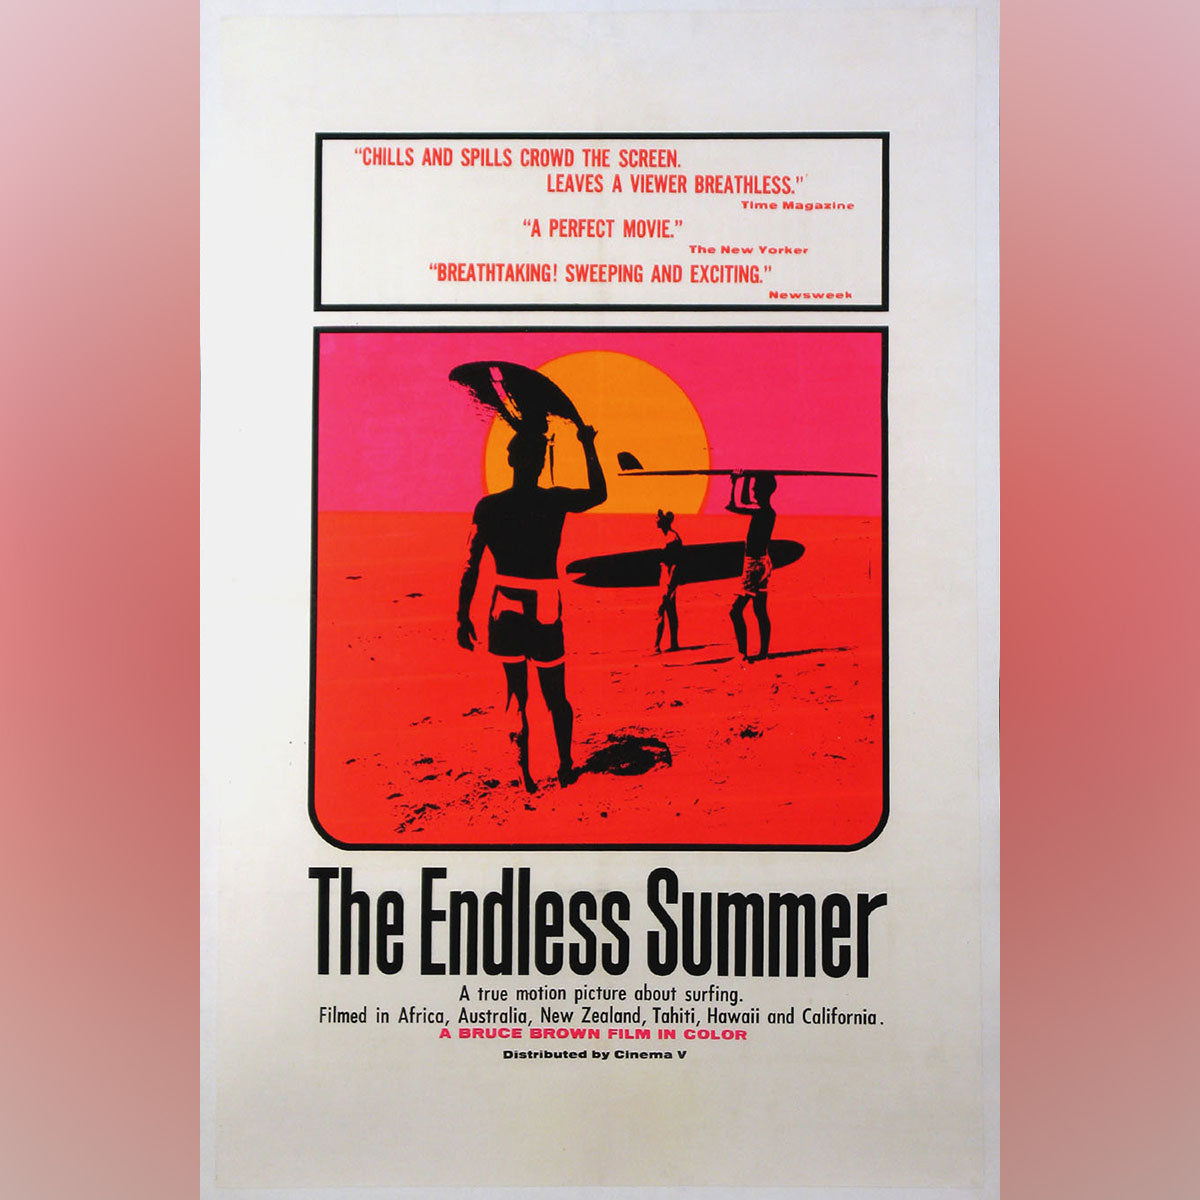 Original Movie Poster of Endless Summer, The (1966)